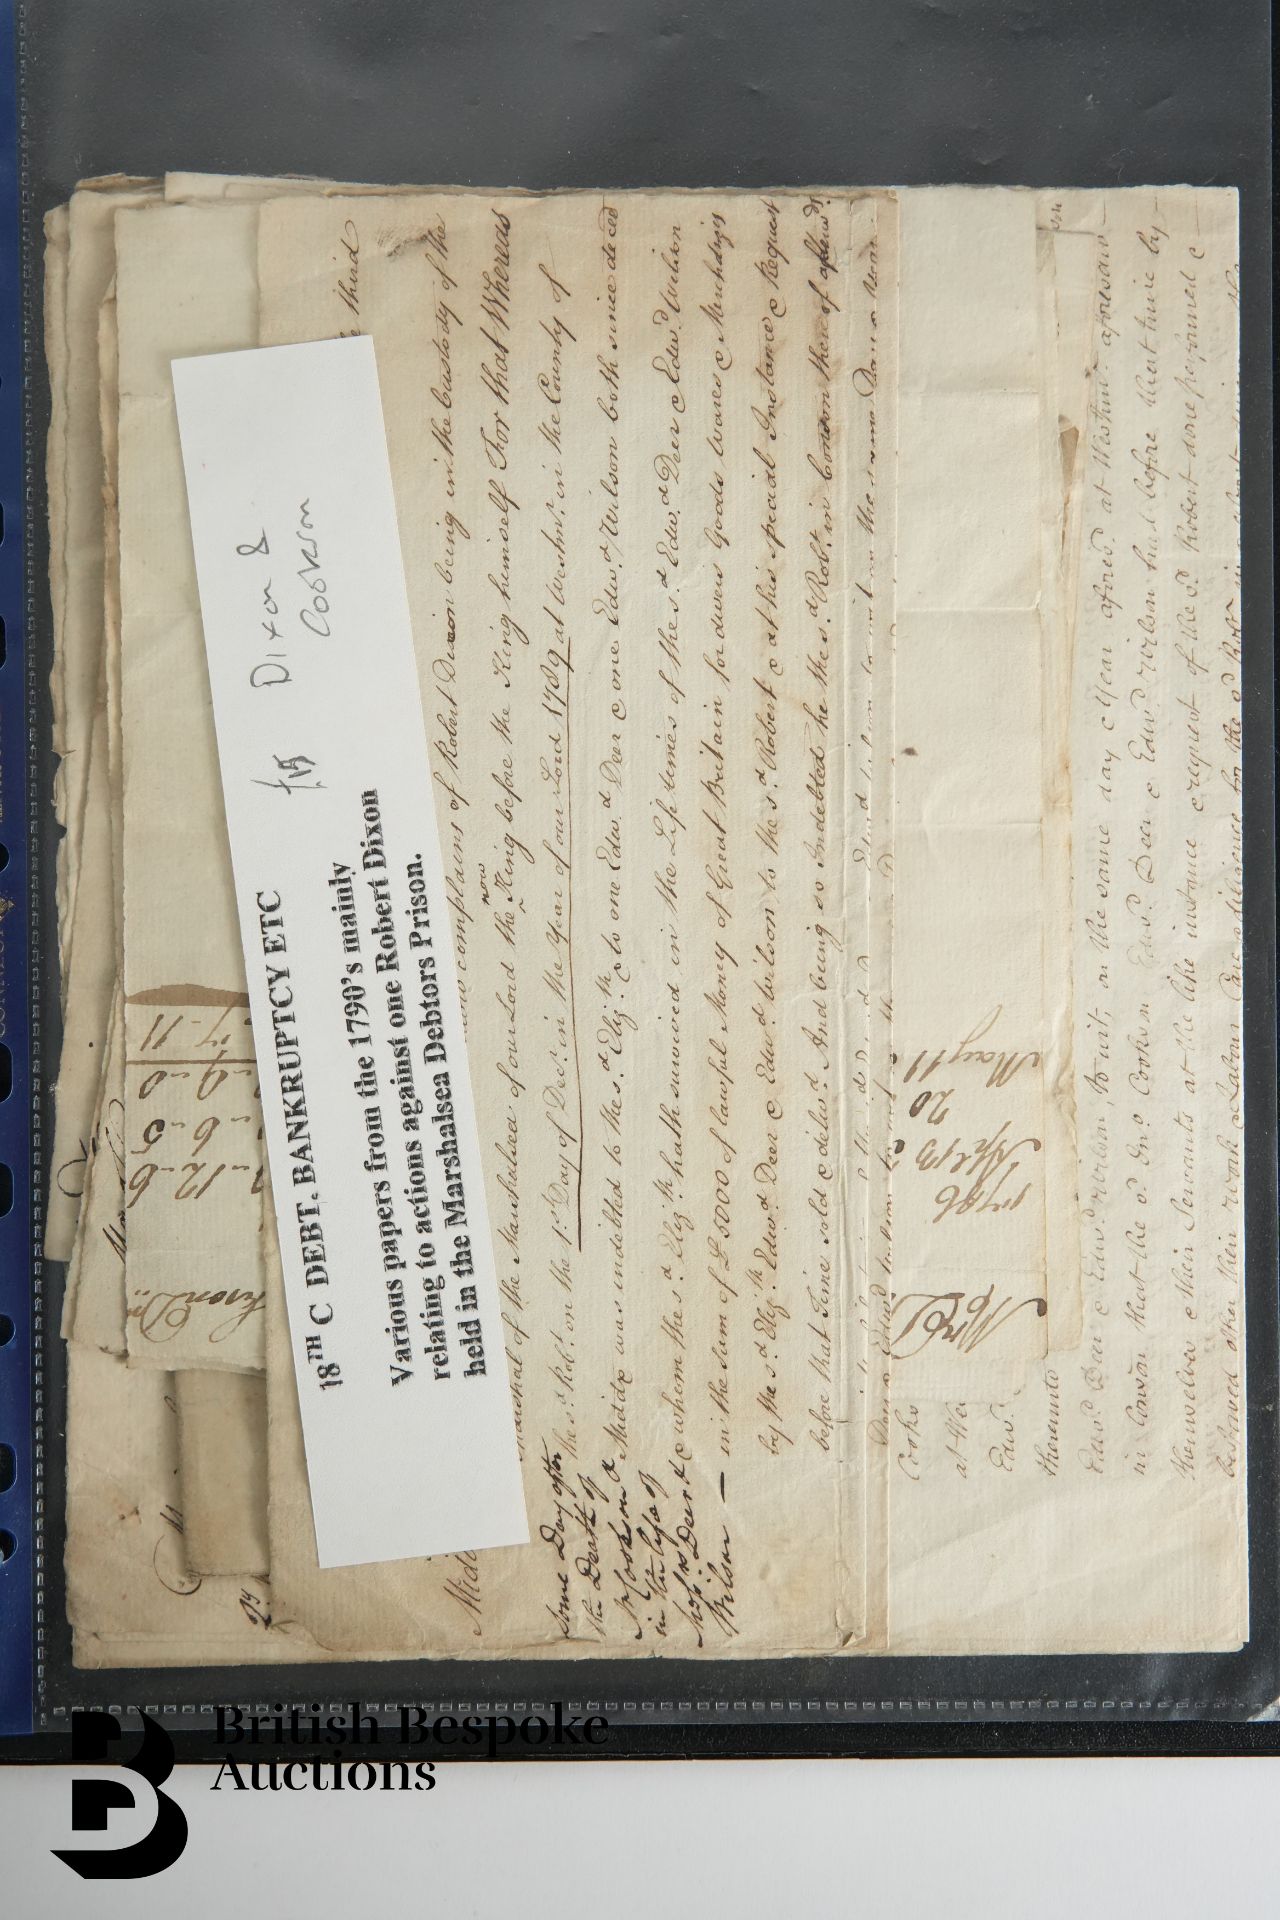 Black Ring Binder Containing 18th and 19th Century Letters or Documents - Image 16 of 16